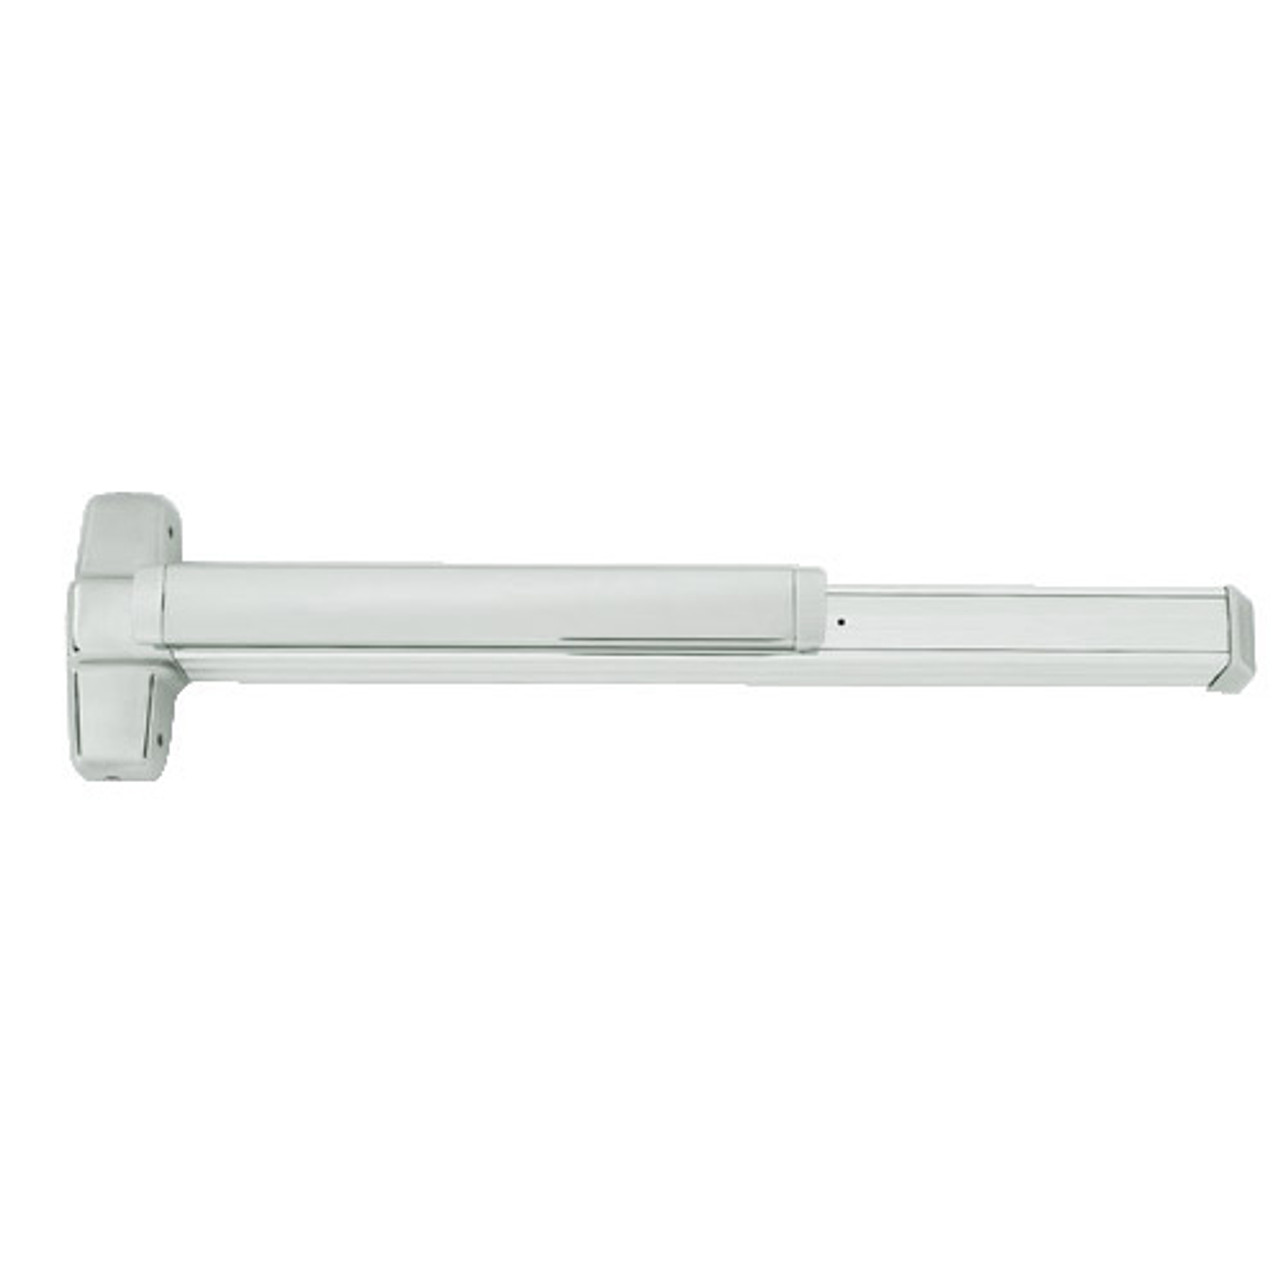 EL9847WDC-EO-US26D-3 Von Duprin Exit Device with Electric Latch Retraction in Satin Chrome